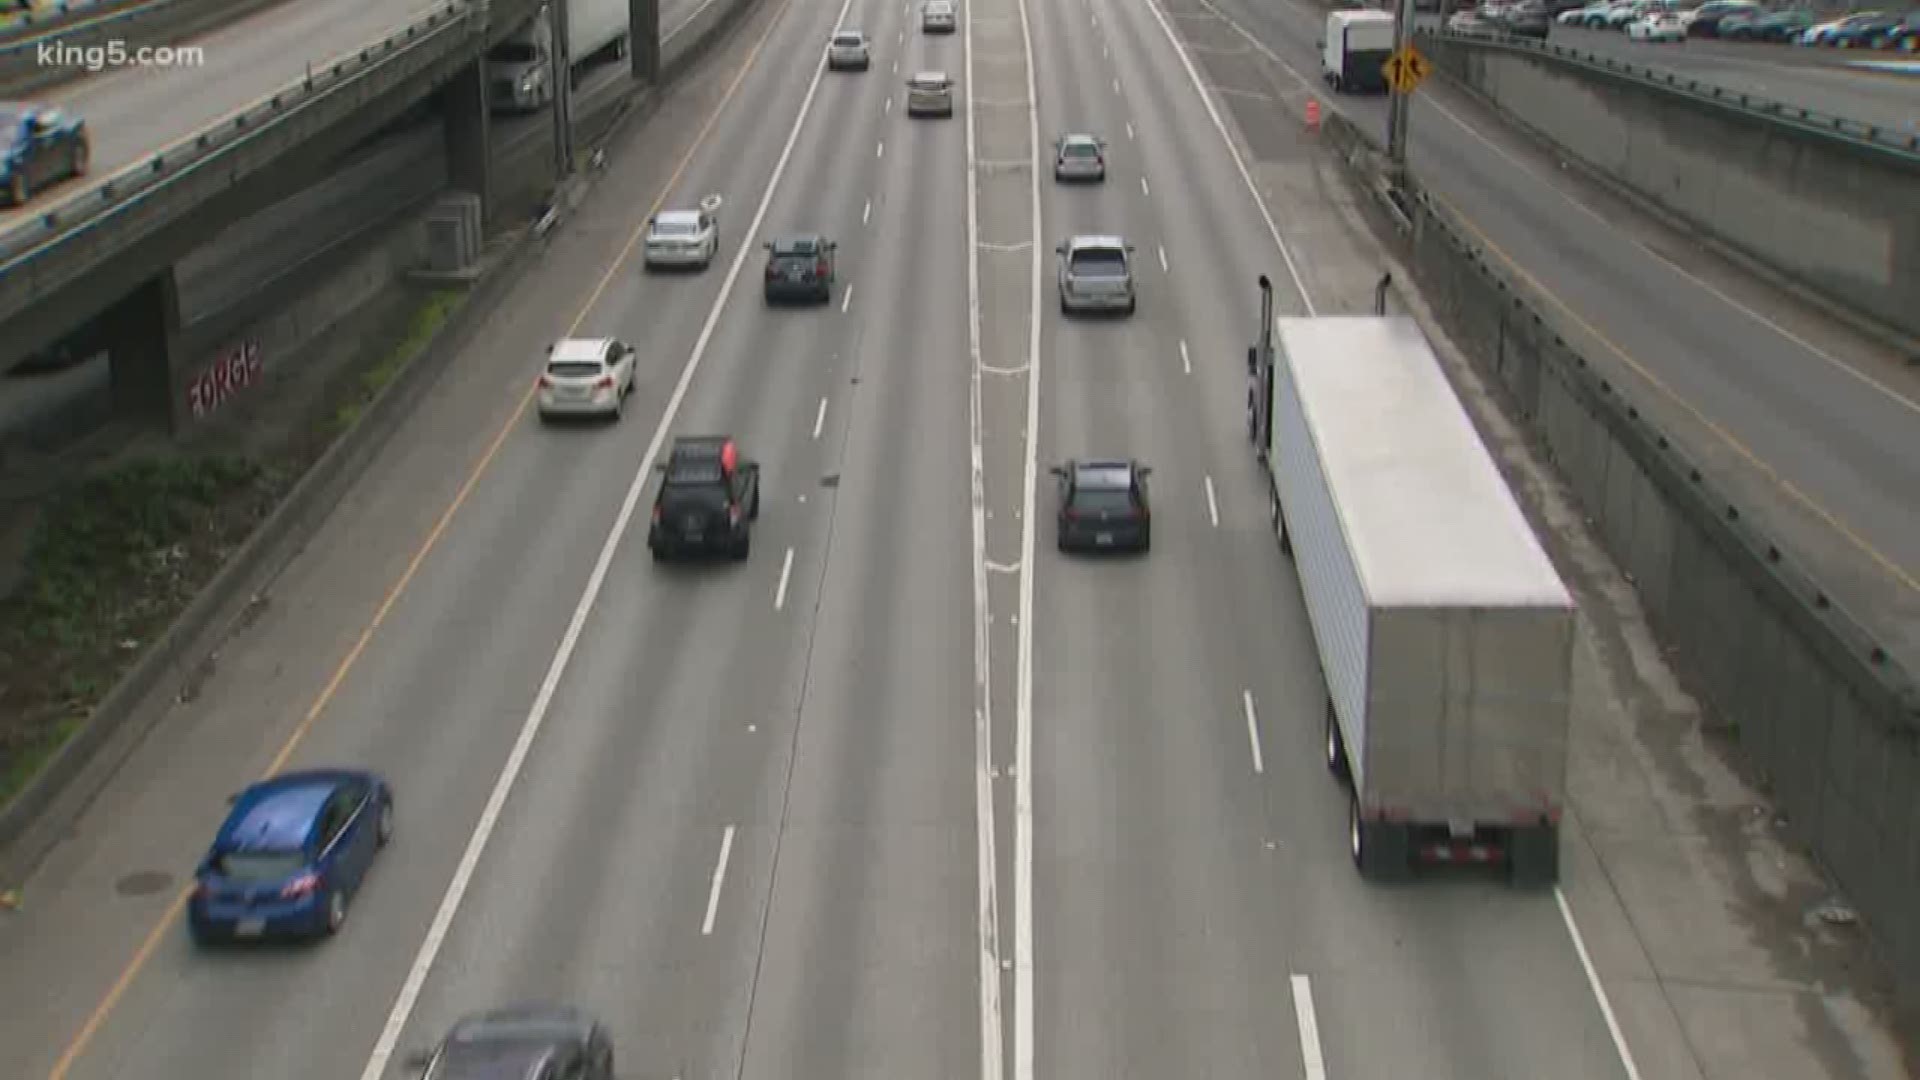 Multiple construction projects will impact traffic around the Puget Sound region this weekend.